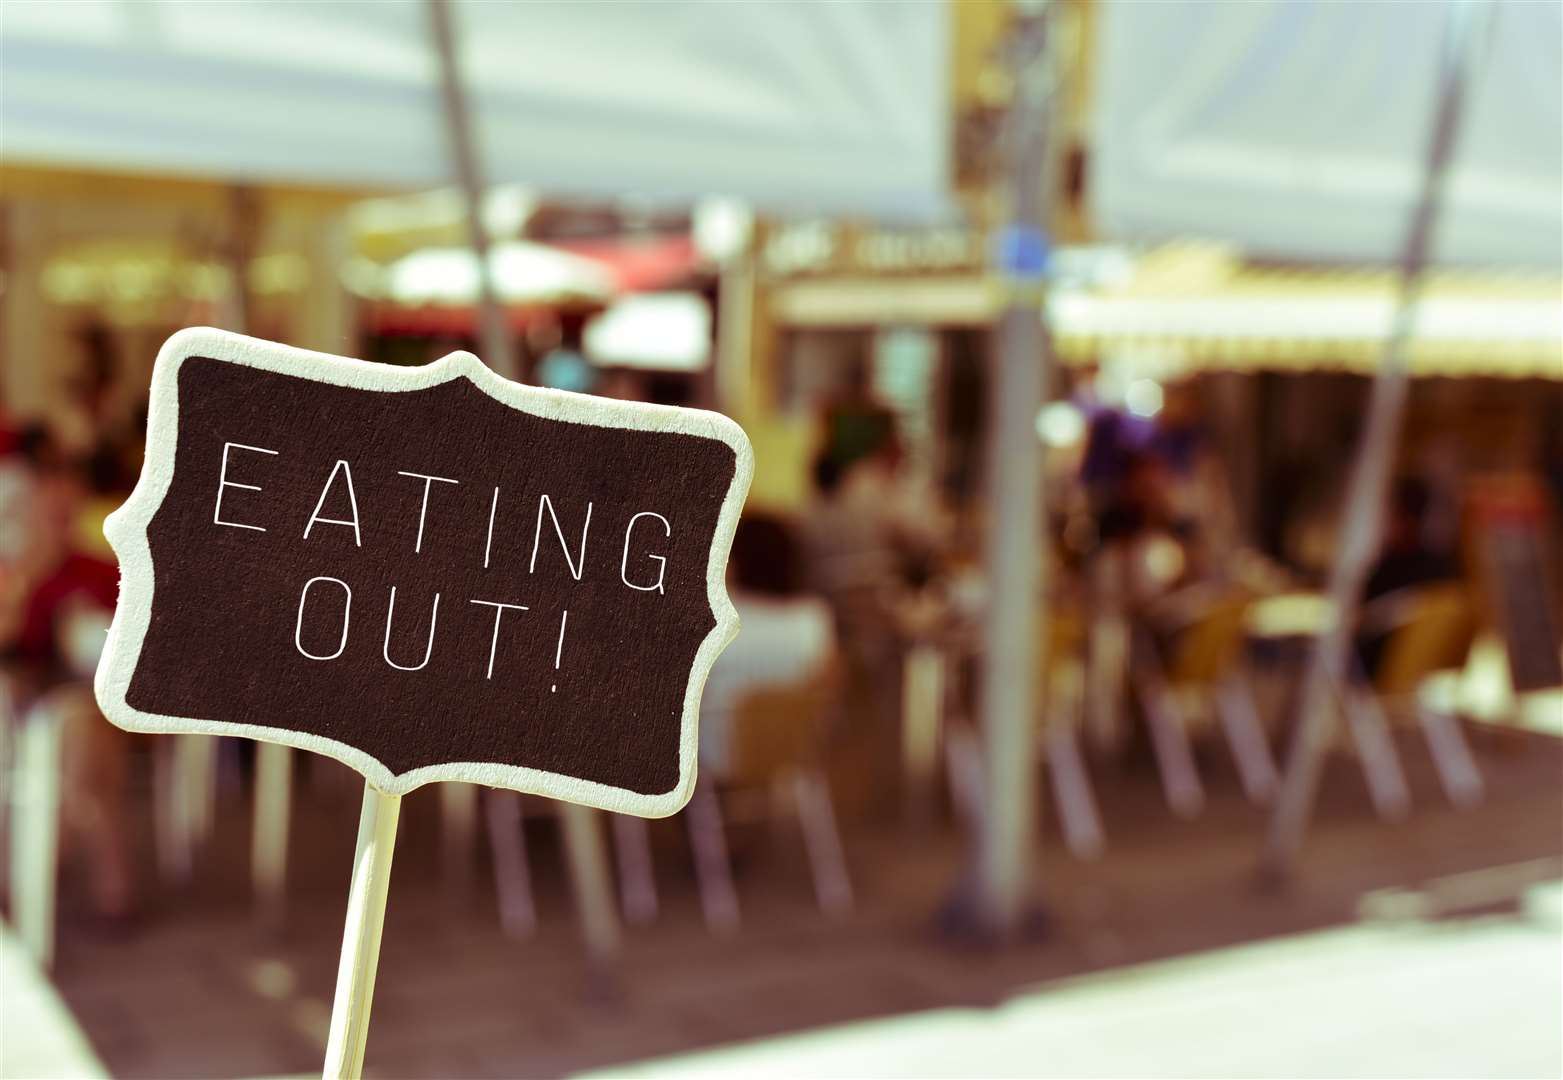 Eating out scheme is being claimed as a great success